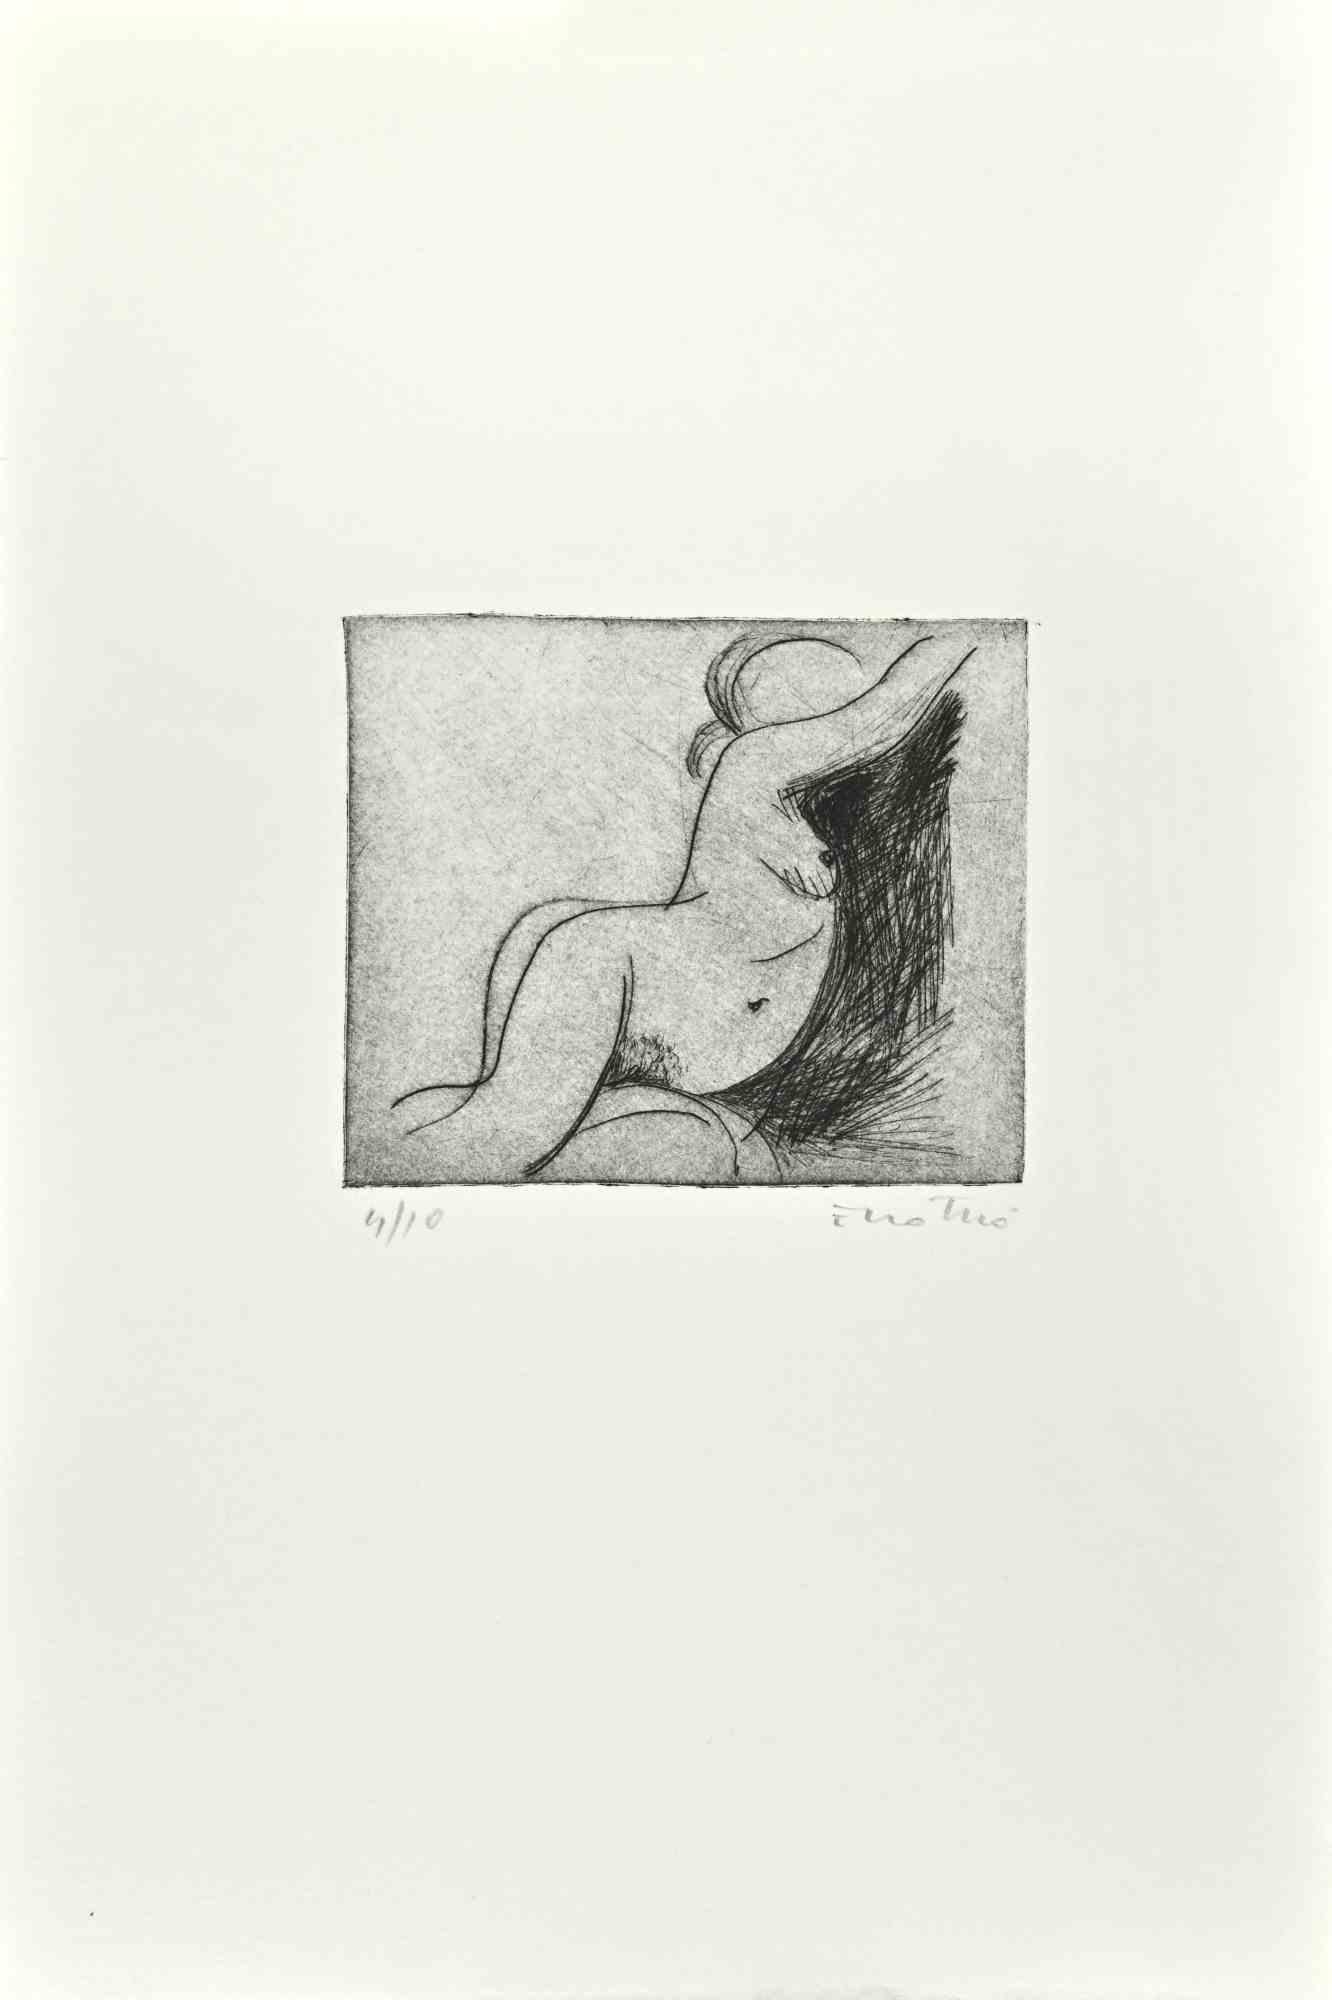 Nude is an Etching realized by Enotrio Pugliese in 1963.

Limited edition of 10 copies numbered and signed by the artist.

Good condition on a white cardboard.

Enotrio Pugliese (May 11, 1920 - August 1989) was an Italian painter. Born in Buenos